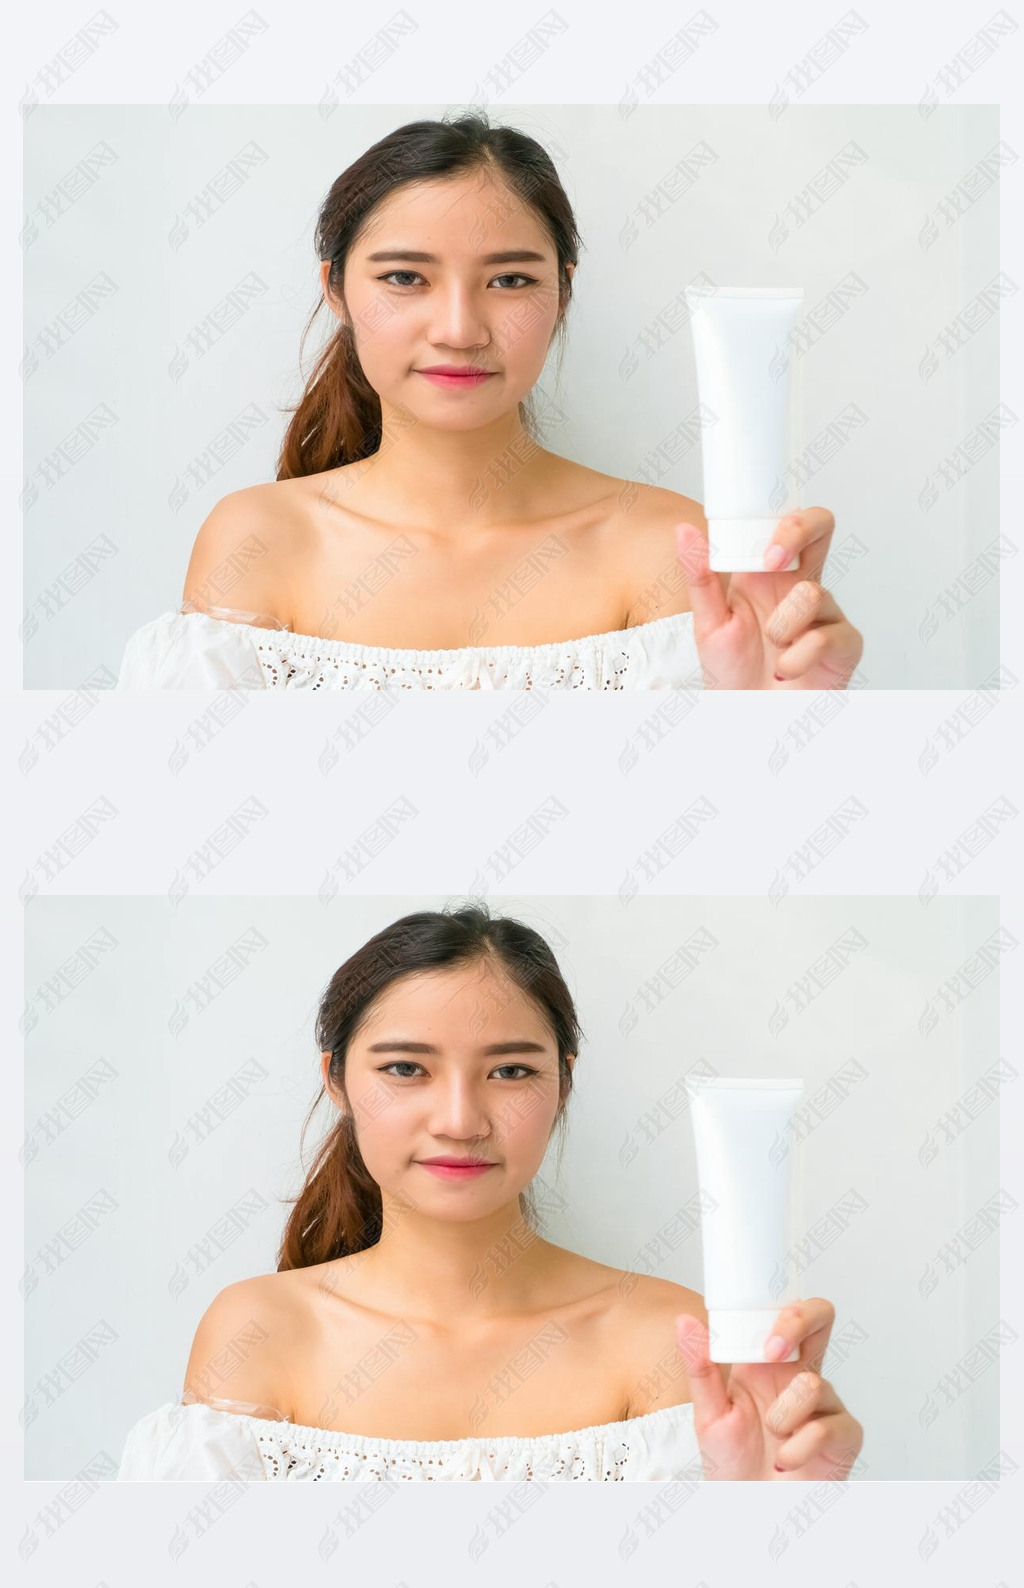 asian woman using a natural skin care product, moisturizer or lo